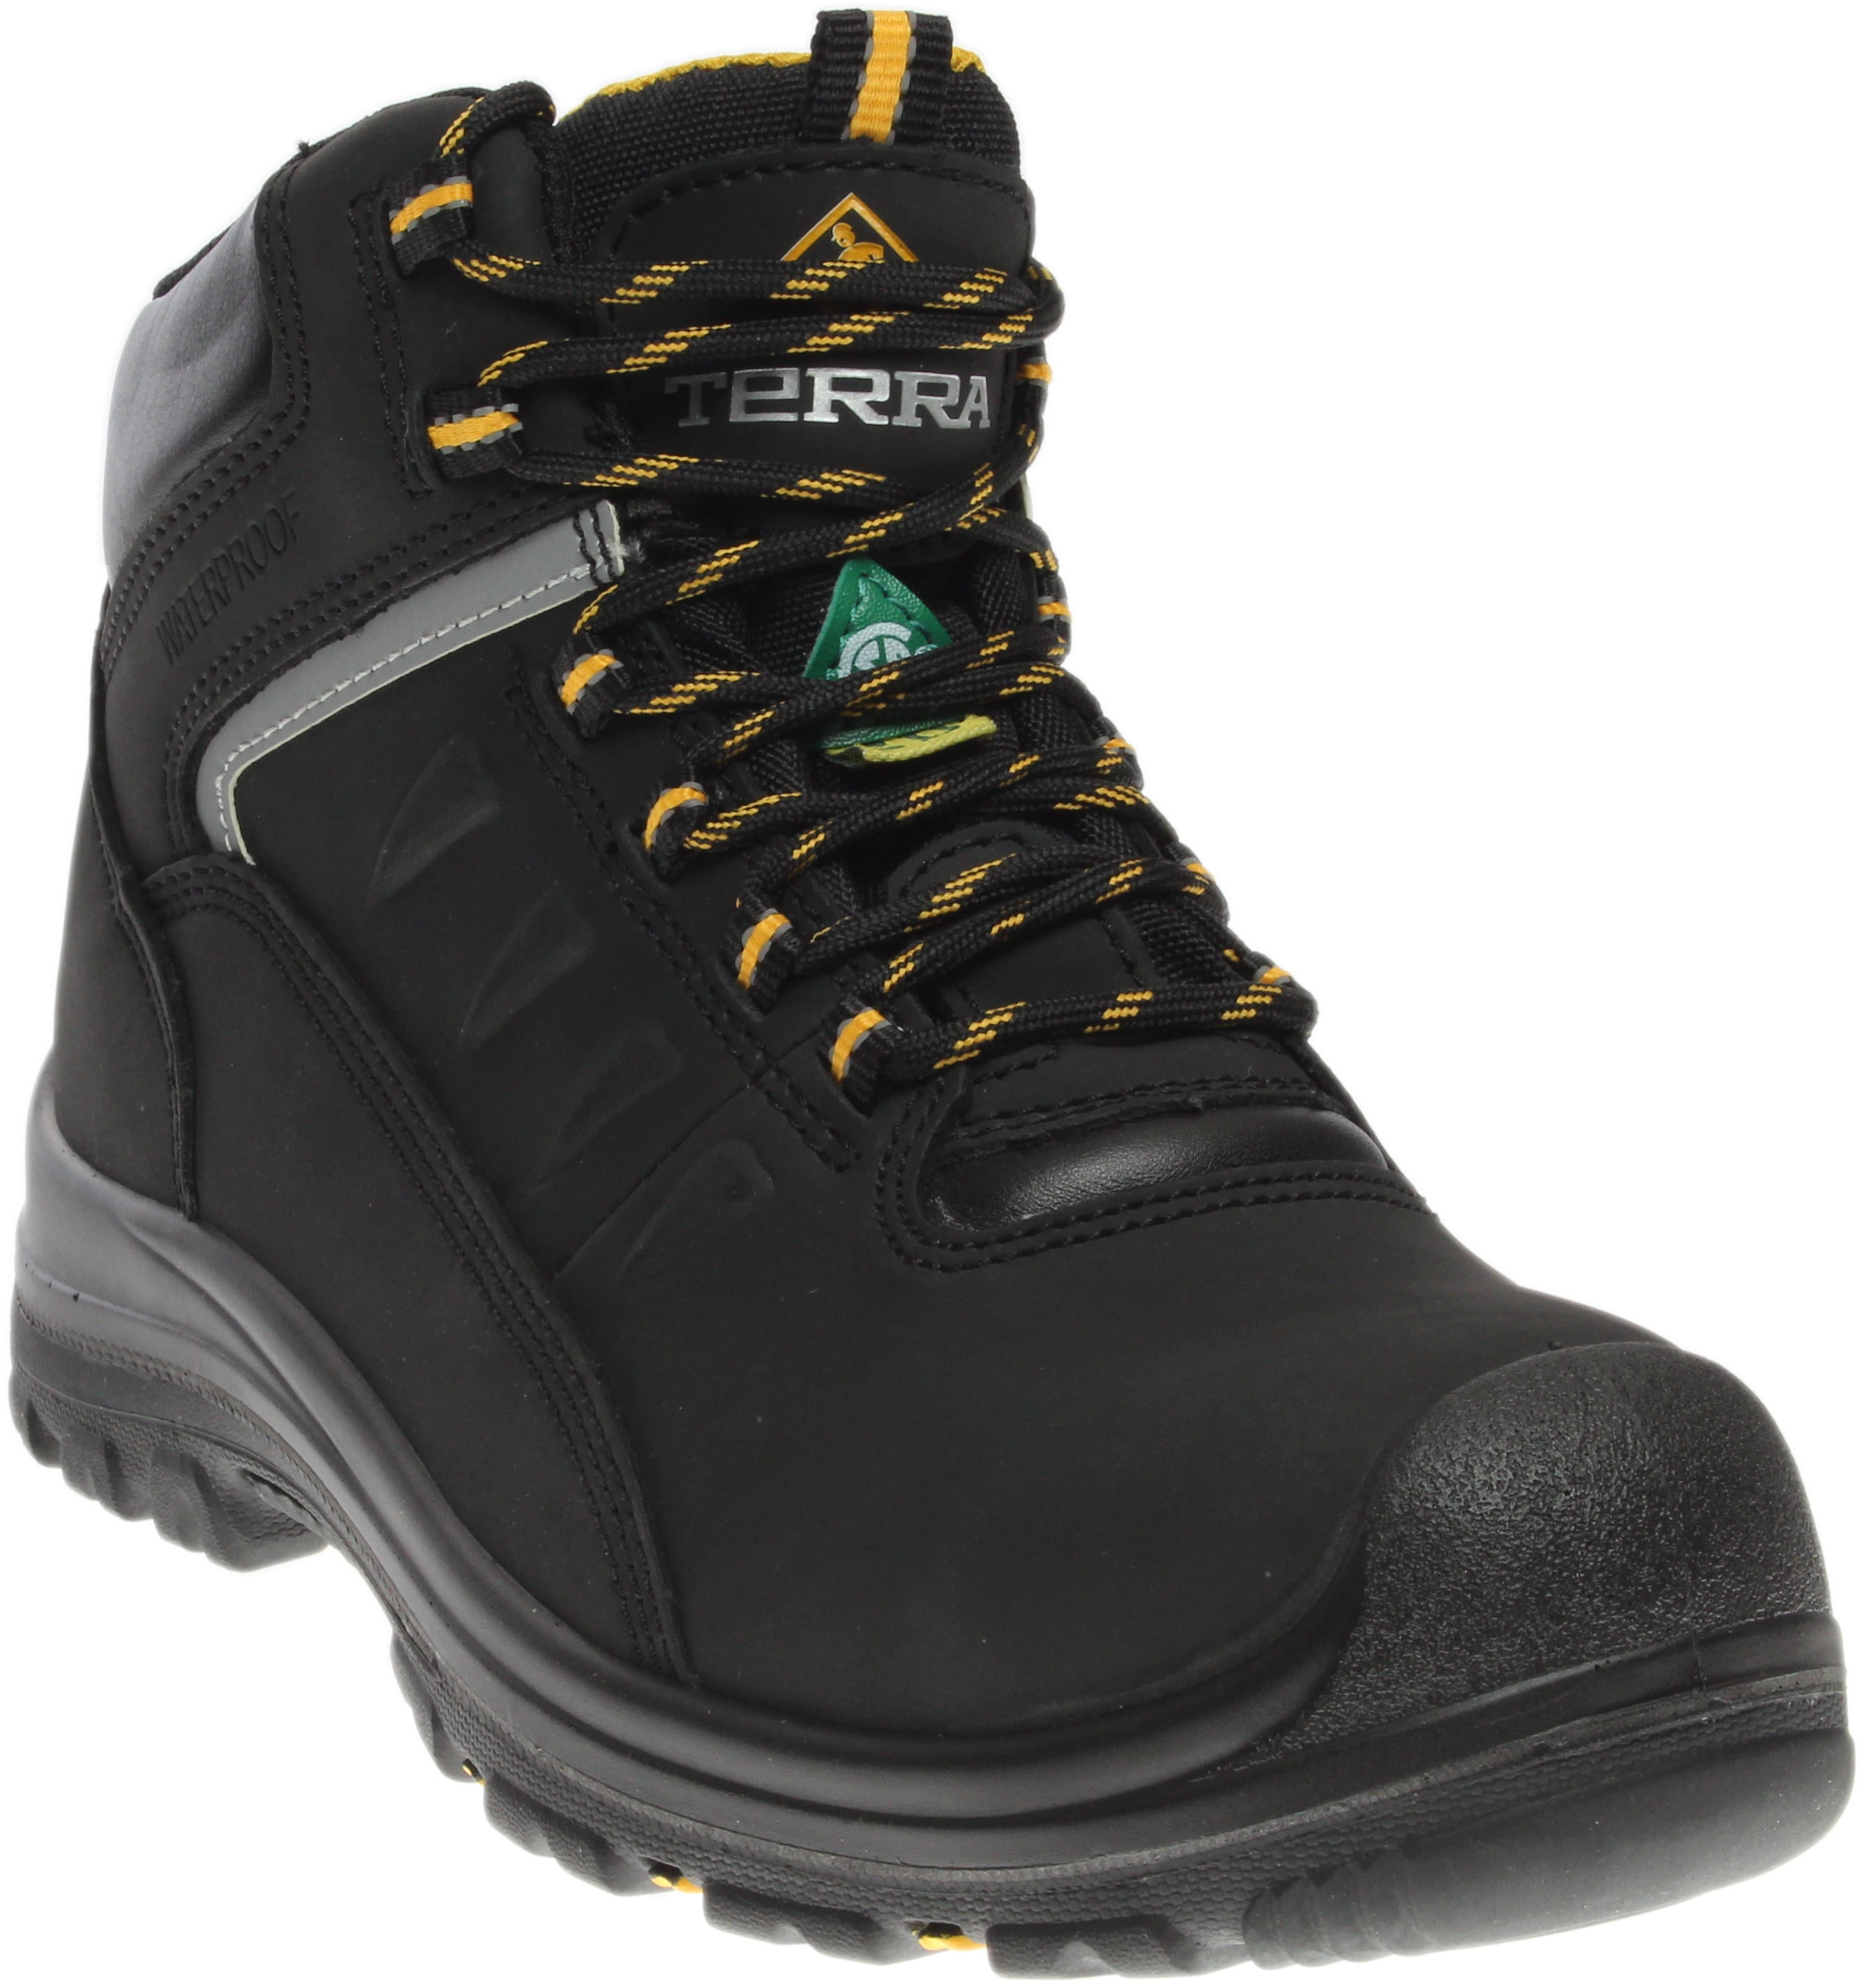 Product Review: Terra Findlay Work Boots | Mister Safety Shoes - YouTube